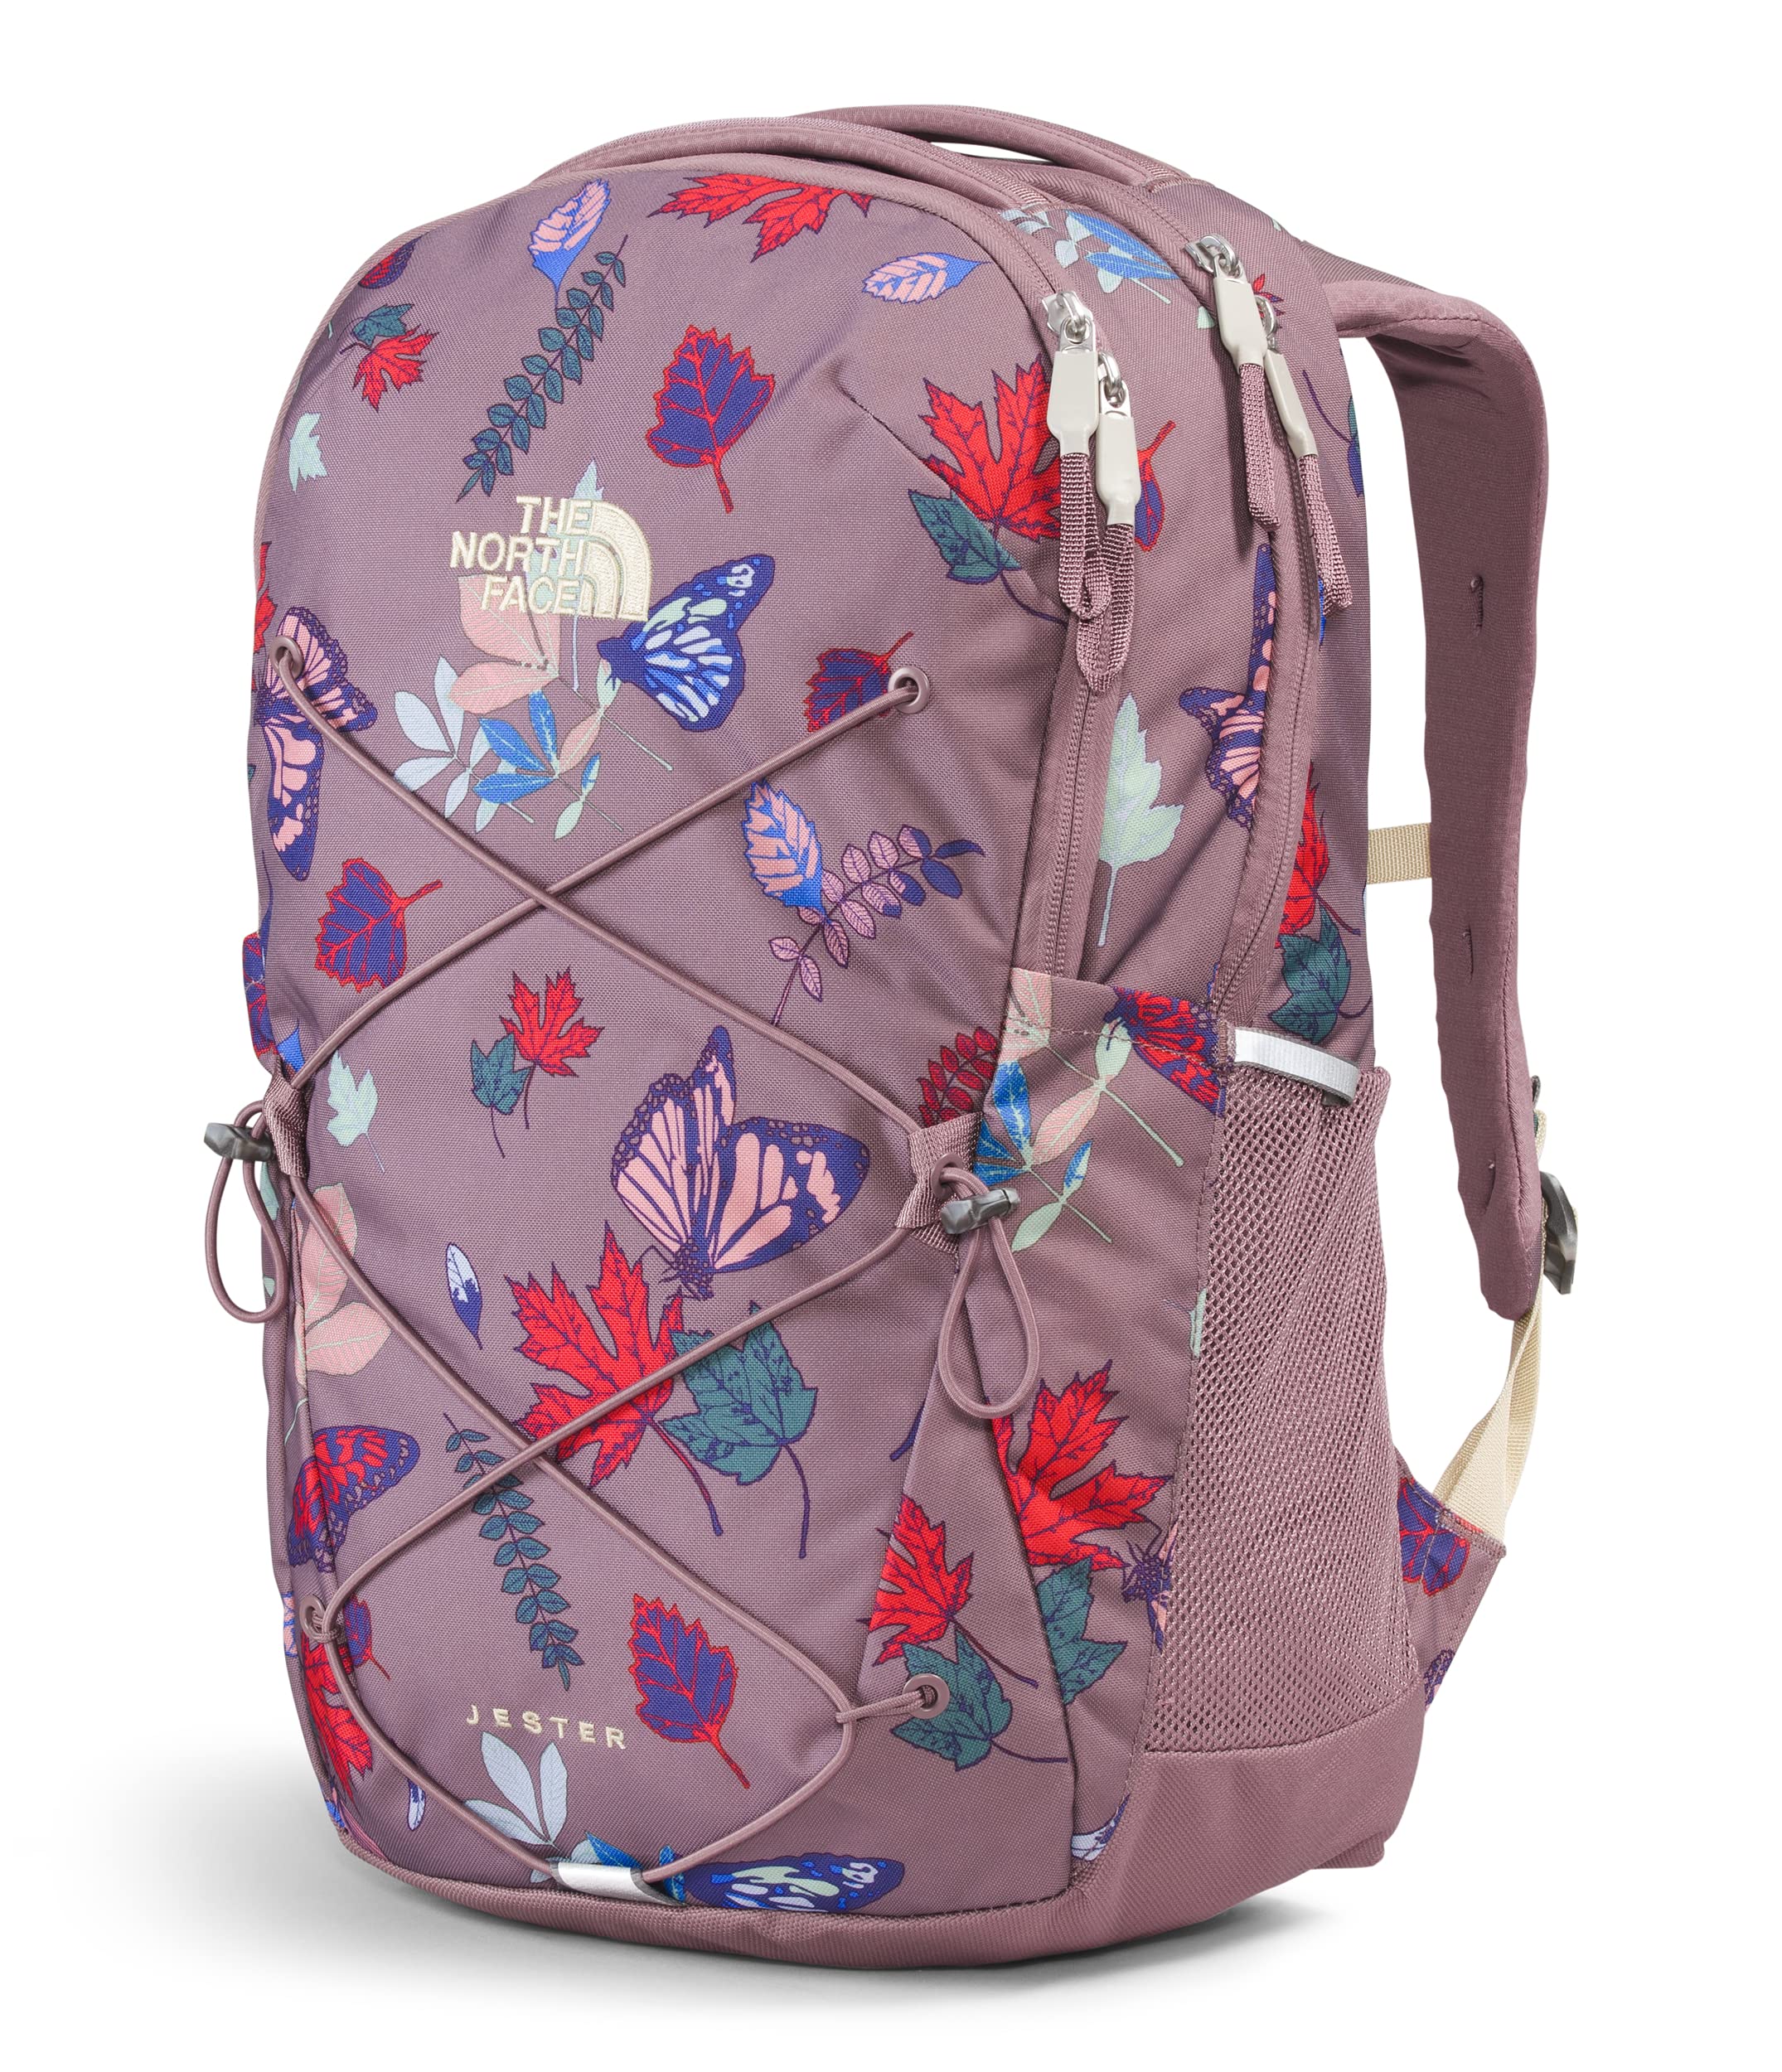 THE NORTH FACE Women's Jester Commuter Laptop Backpack, Fawn Grey Fall Wanderer Print, One Size